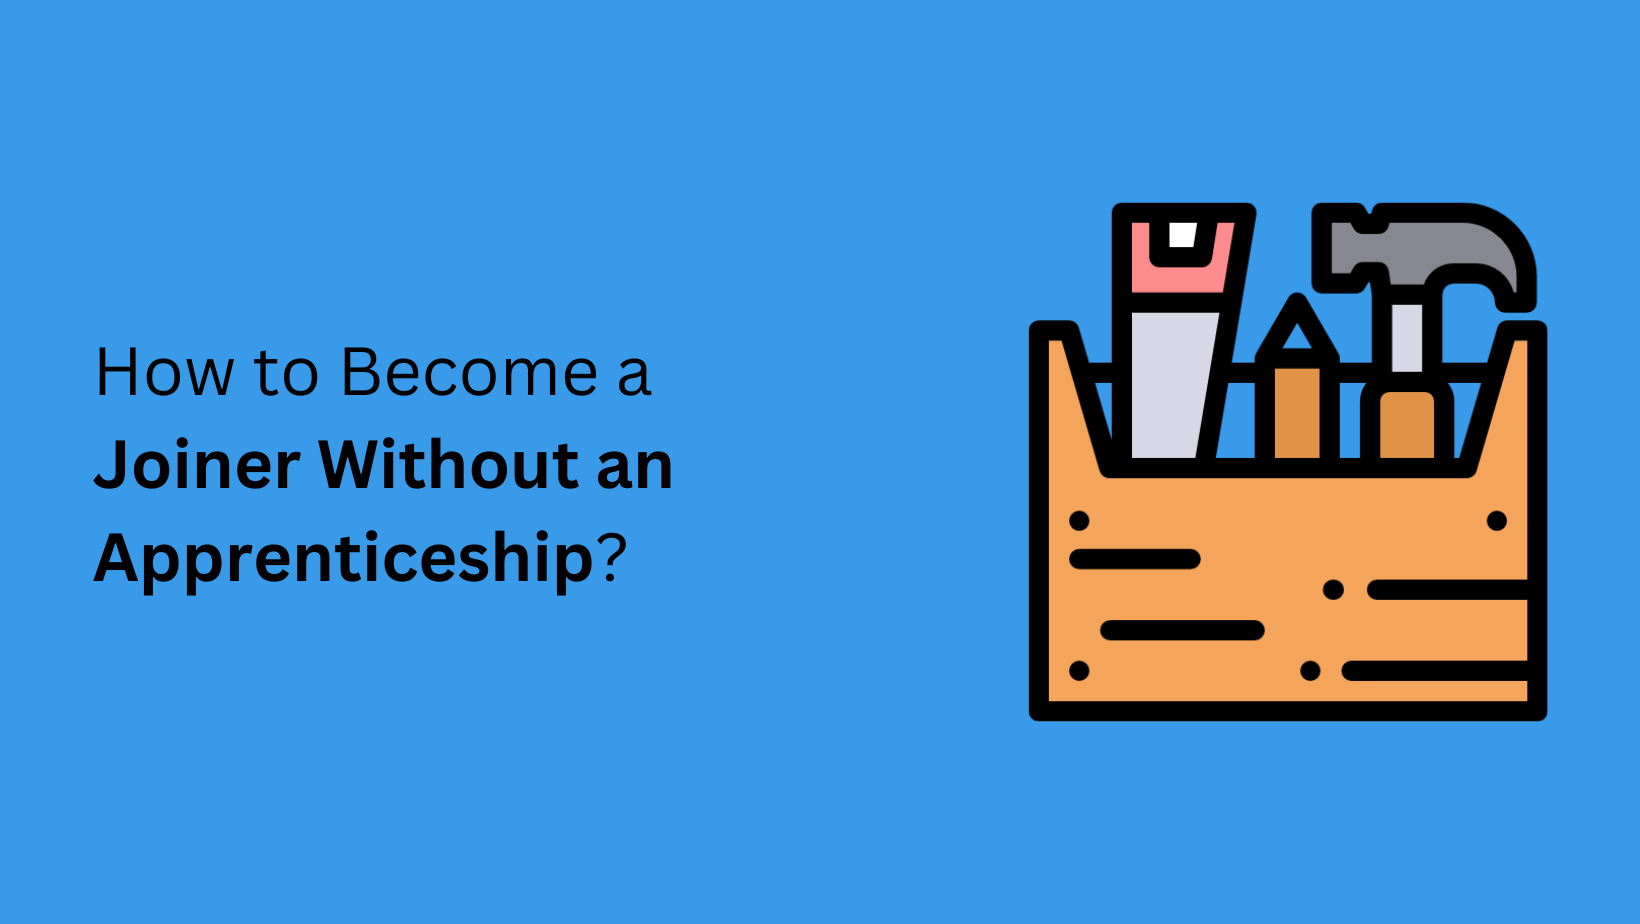 How to Become a Joiner Without an Apprenticeship